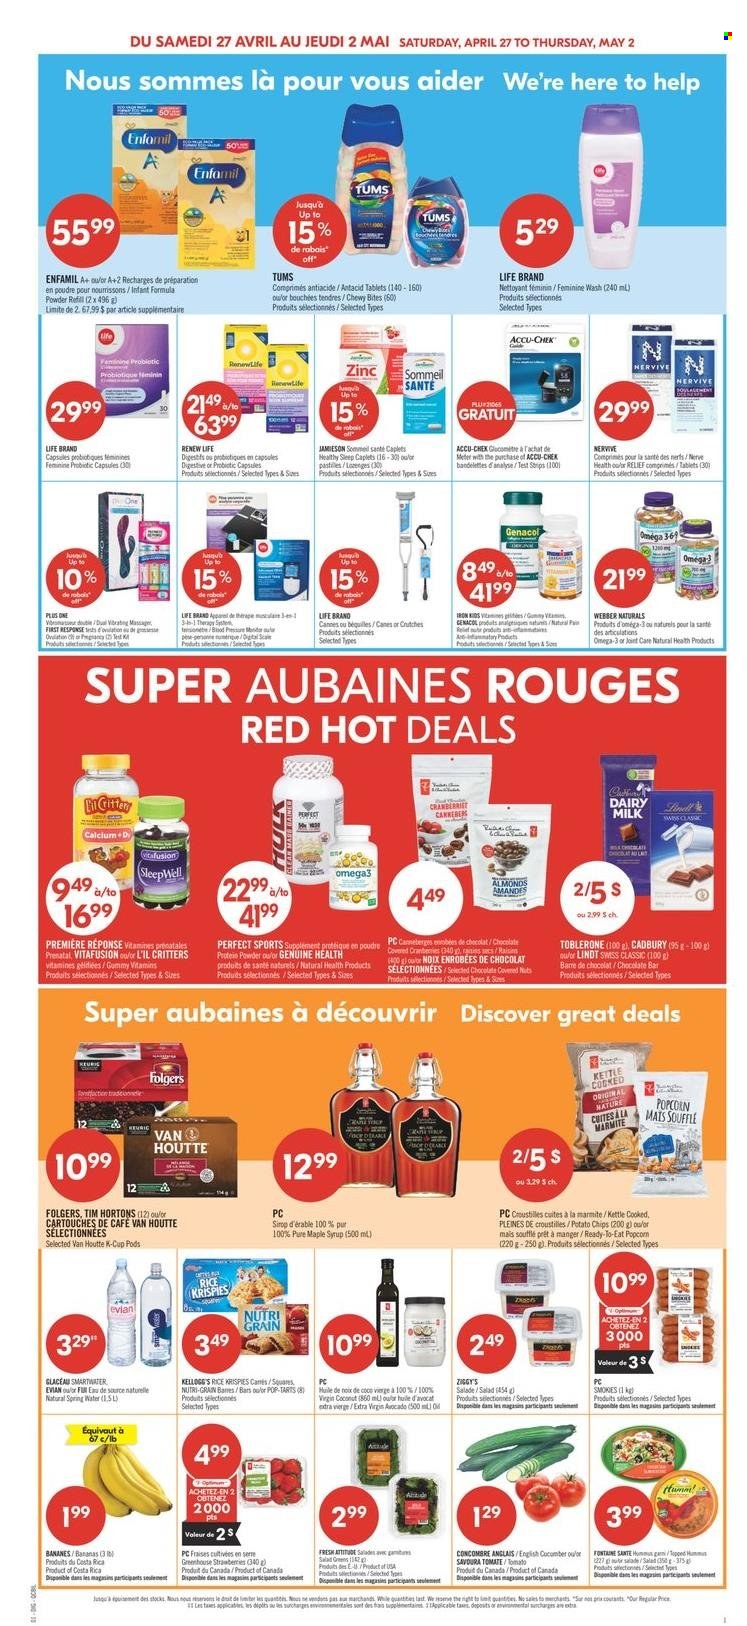 thumbnail - Pharmaprix Flyer - April 27, 2024 - May 02, 2024 - Sales products - soufflés, cucumber, salad, avocado, bananas, strawberries, snack bar, milk powder, Kellogg's, Toblerone, Cadbury, pastilles, Dairy Milk, Pop-Tarts, chocolate bar, bars, potato chips, popcorn, Nutri-Grain, extra virgin olive oil, maple syrup, syrup, almonds, coconut, chocolate covered nuts, spring water, bottled water, Smartwater, Evian, Folgers, coffee capsules, K-Cups, Enfamil, infant milk, PREMIERE, Prenatal, calcium, Vitafusion, probiotics, Omega-3, zinc, whey protein, nutritional supplement, Antacid, dietary supplement, health supplement, vitamins, pregnancy test, glucose monitoring system, Lindt. Page 12.